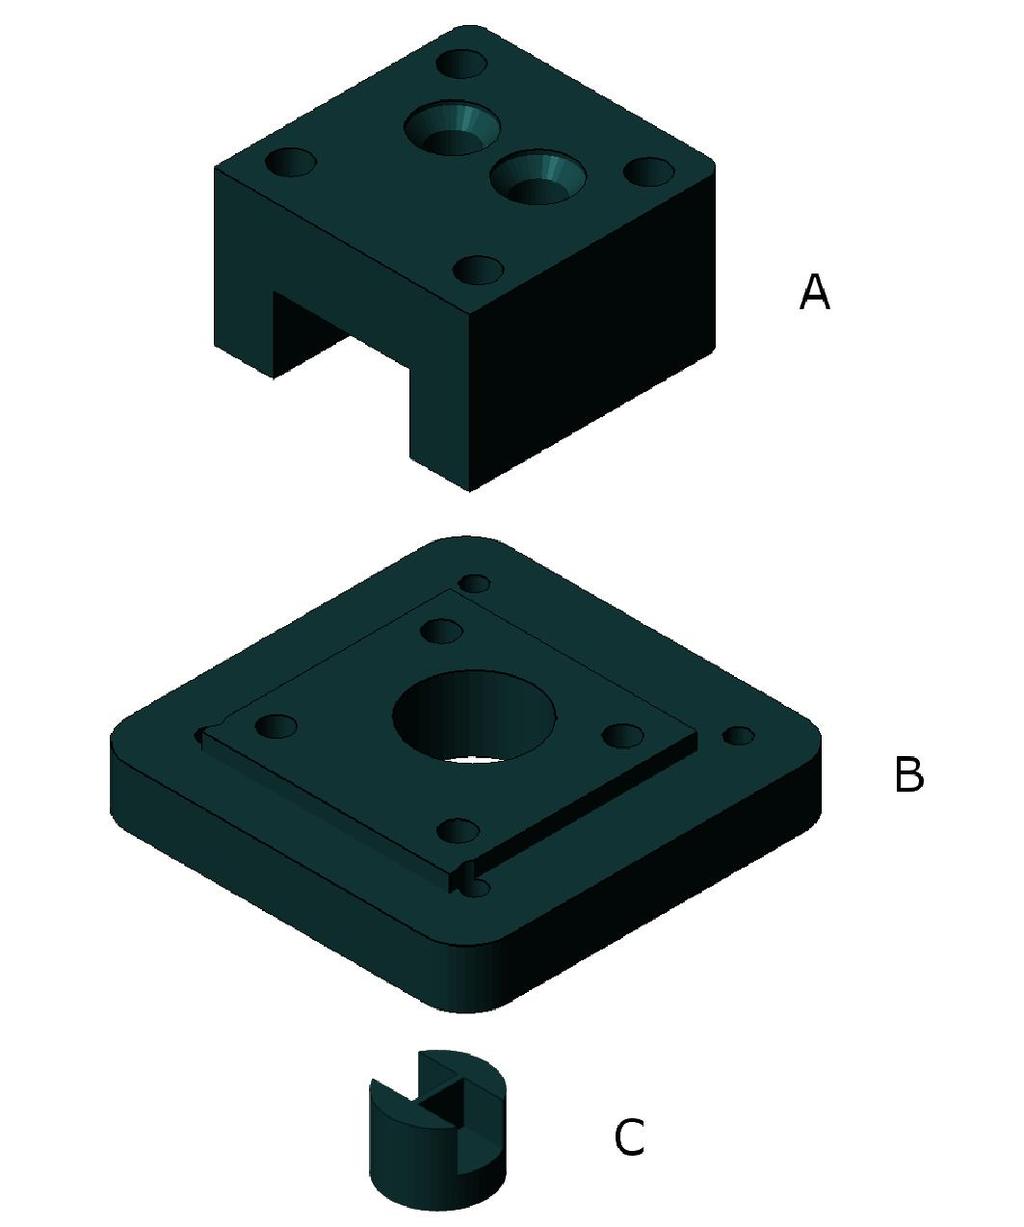 Fig. S2 Schematic illustration of the assembly of the measurement jig.